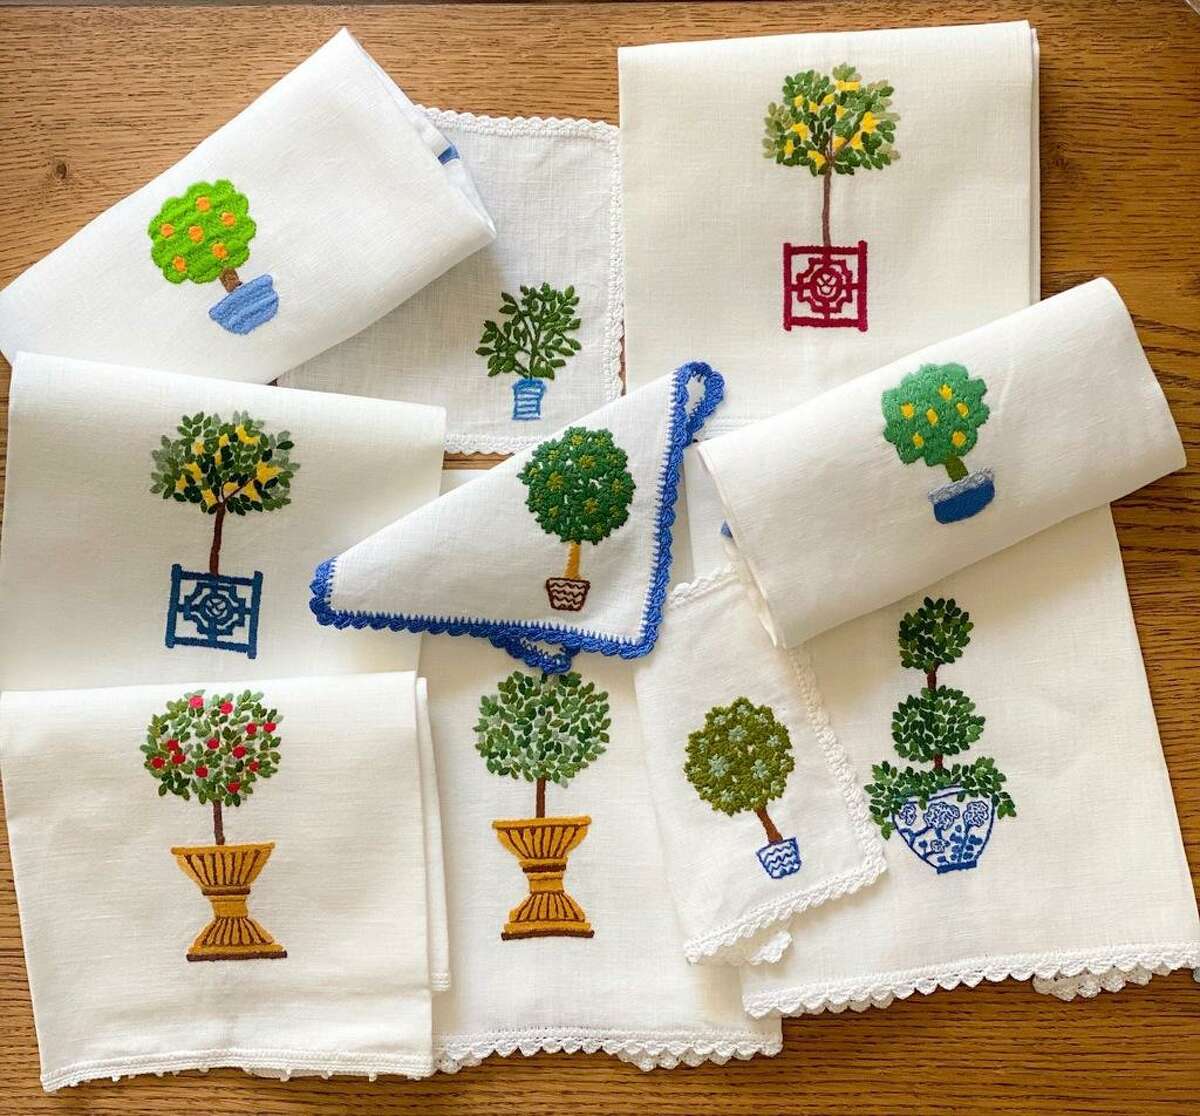 Hibiscus linens: Is there anything prettier or more welcoming than a hand-embroidered hand towel in a powder bathroom, or delicate cocktail napkins for a girlfriends’ happy hour? Hibiscus Linens has an inventory of both and will custom make or monogram anything. Topiary cocktail napkins are $125 for sets of 4, hand towels are $145-$165. DIY kits, including an online class, are $22-$86. hibiscuslinens.com